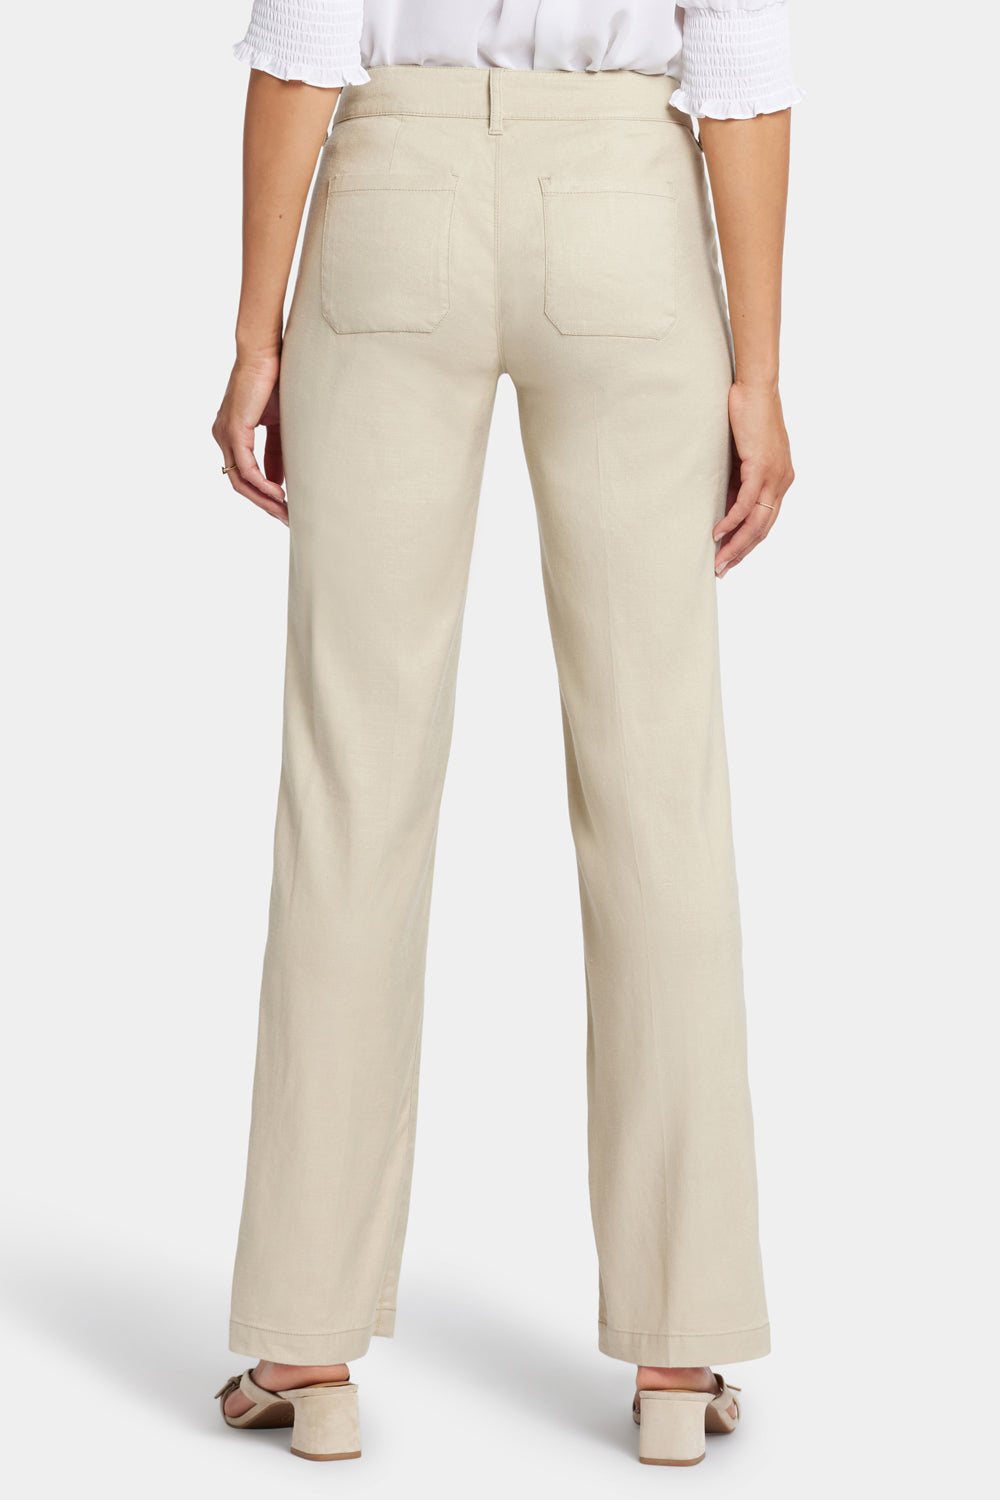 Trouser Pants In Stretch Linen - Feather Tan | NYDJ